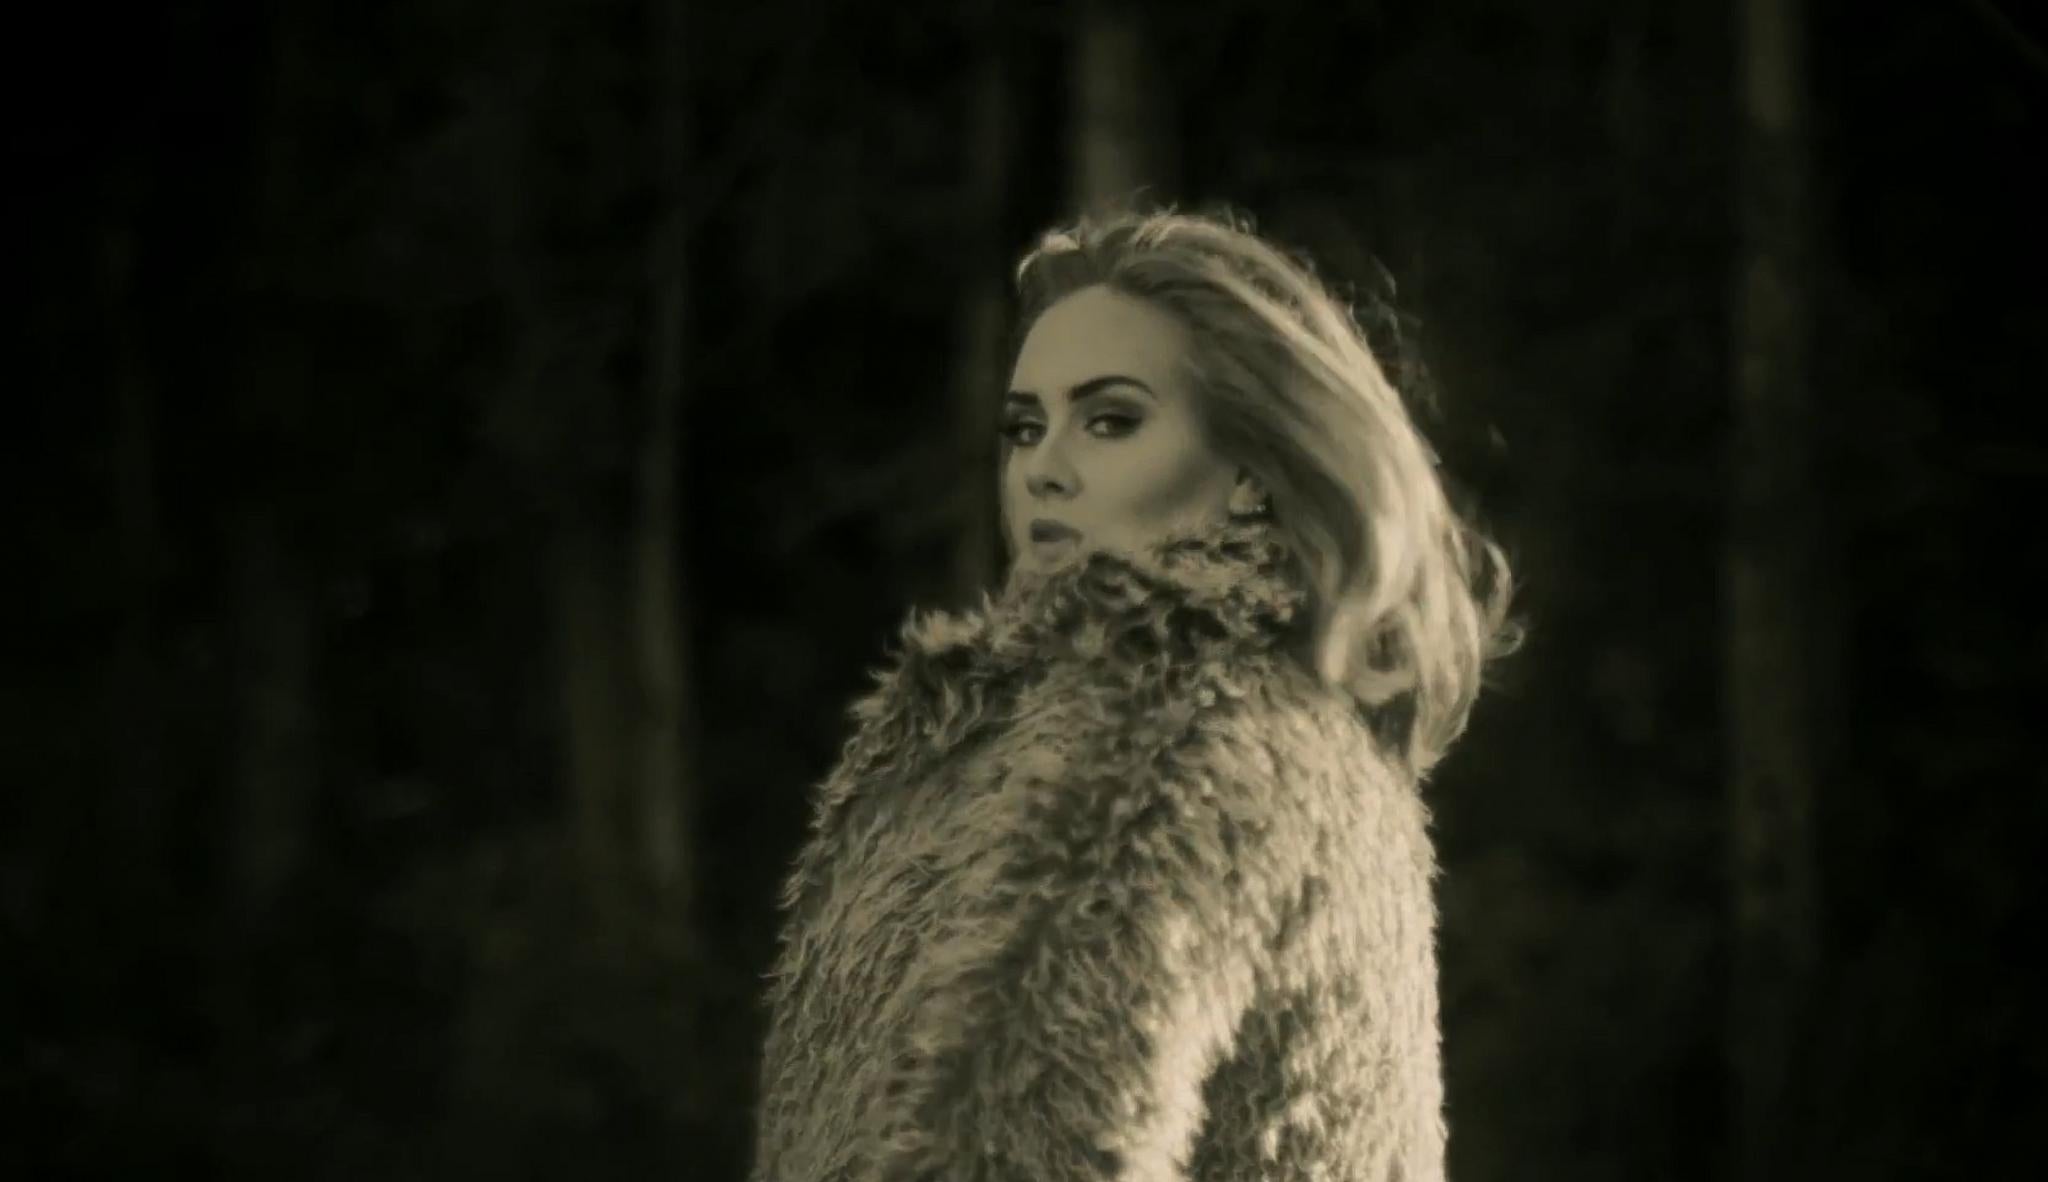 Adele Drops 'Hello' Video, and We've Got Thoughts... Lots of Them!